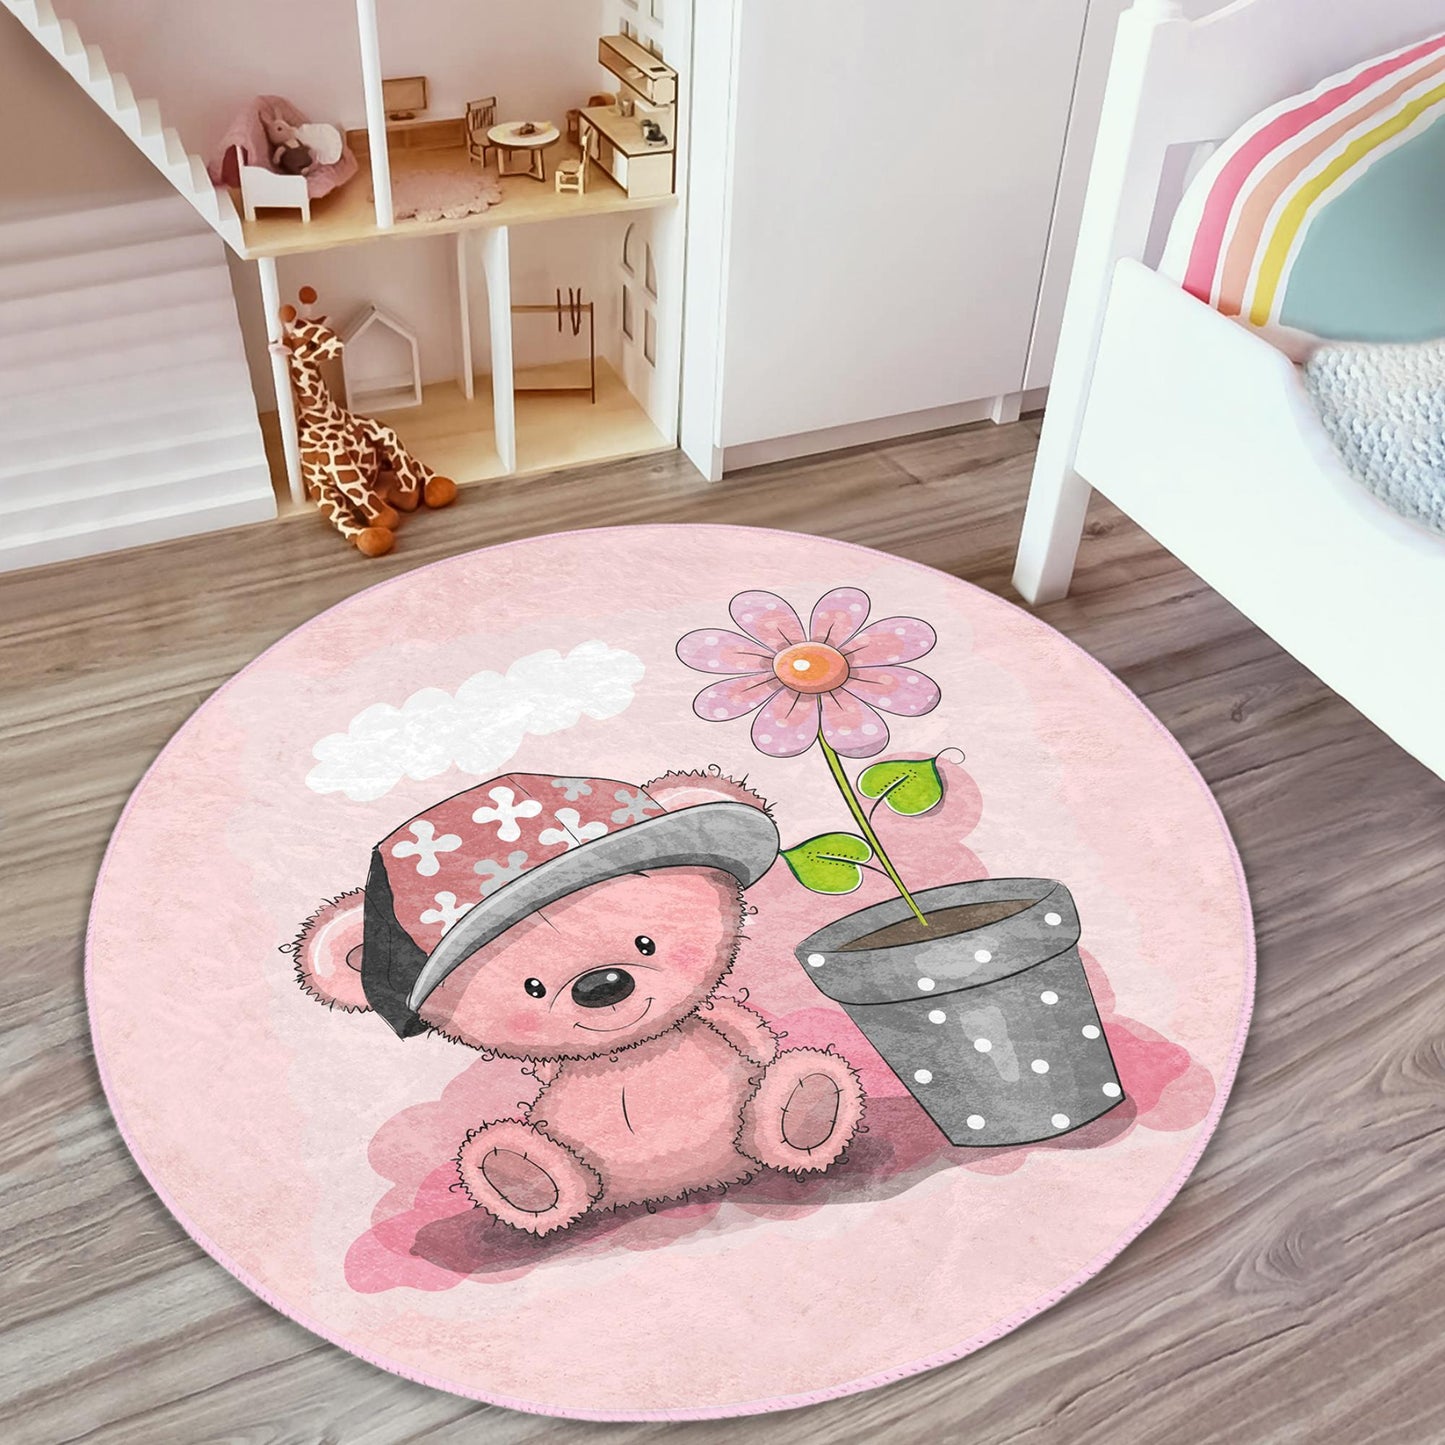 Imaginative girls room rug featuring a pink bear design for cozy playtime.